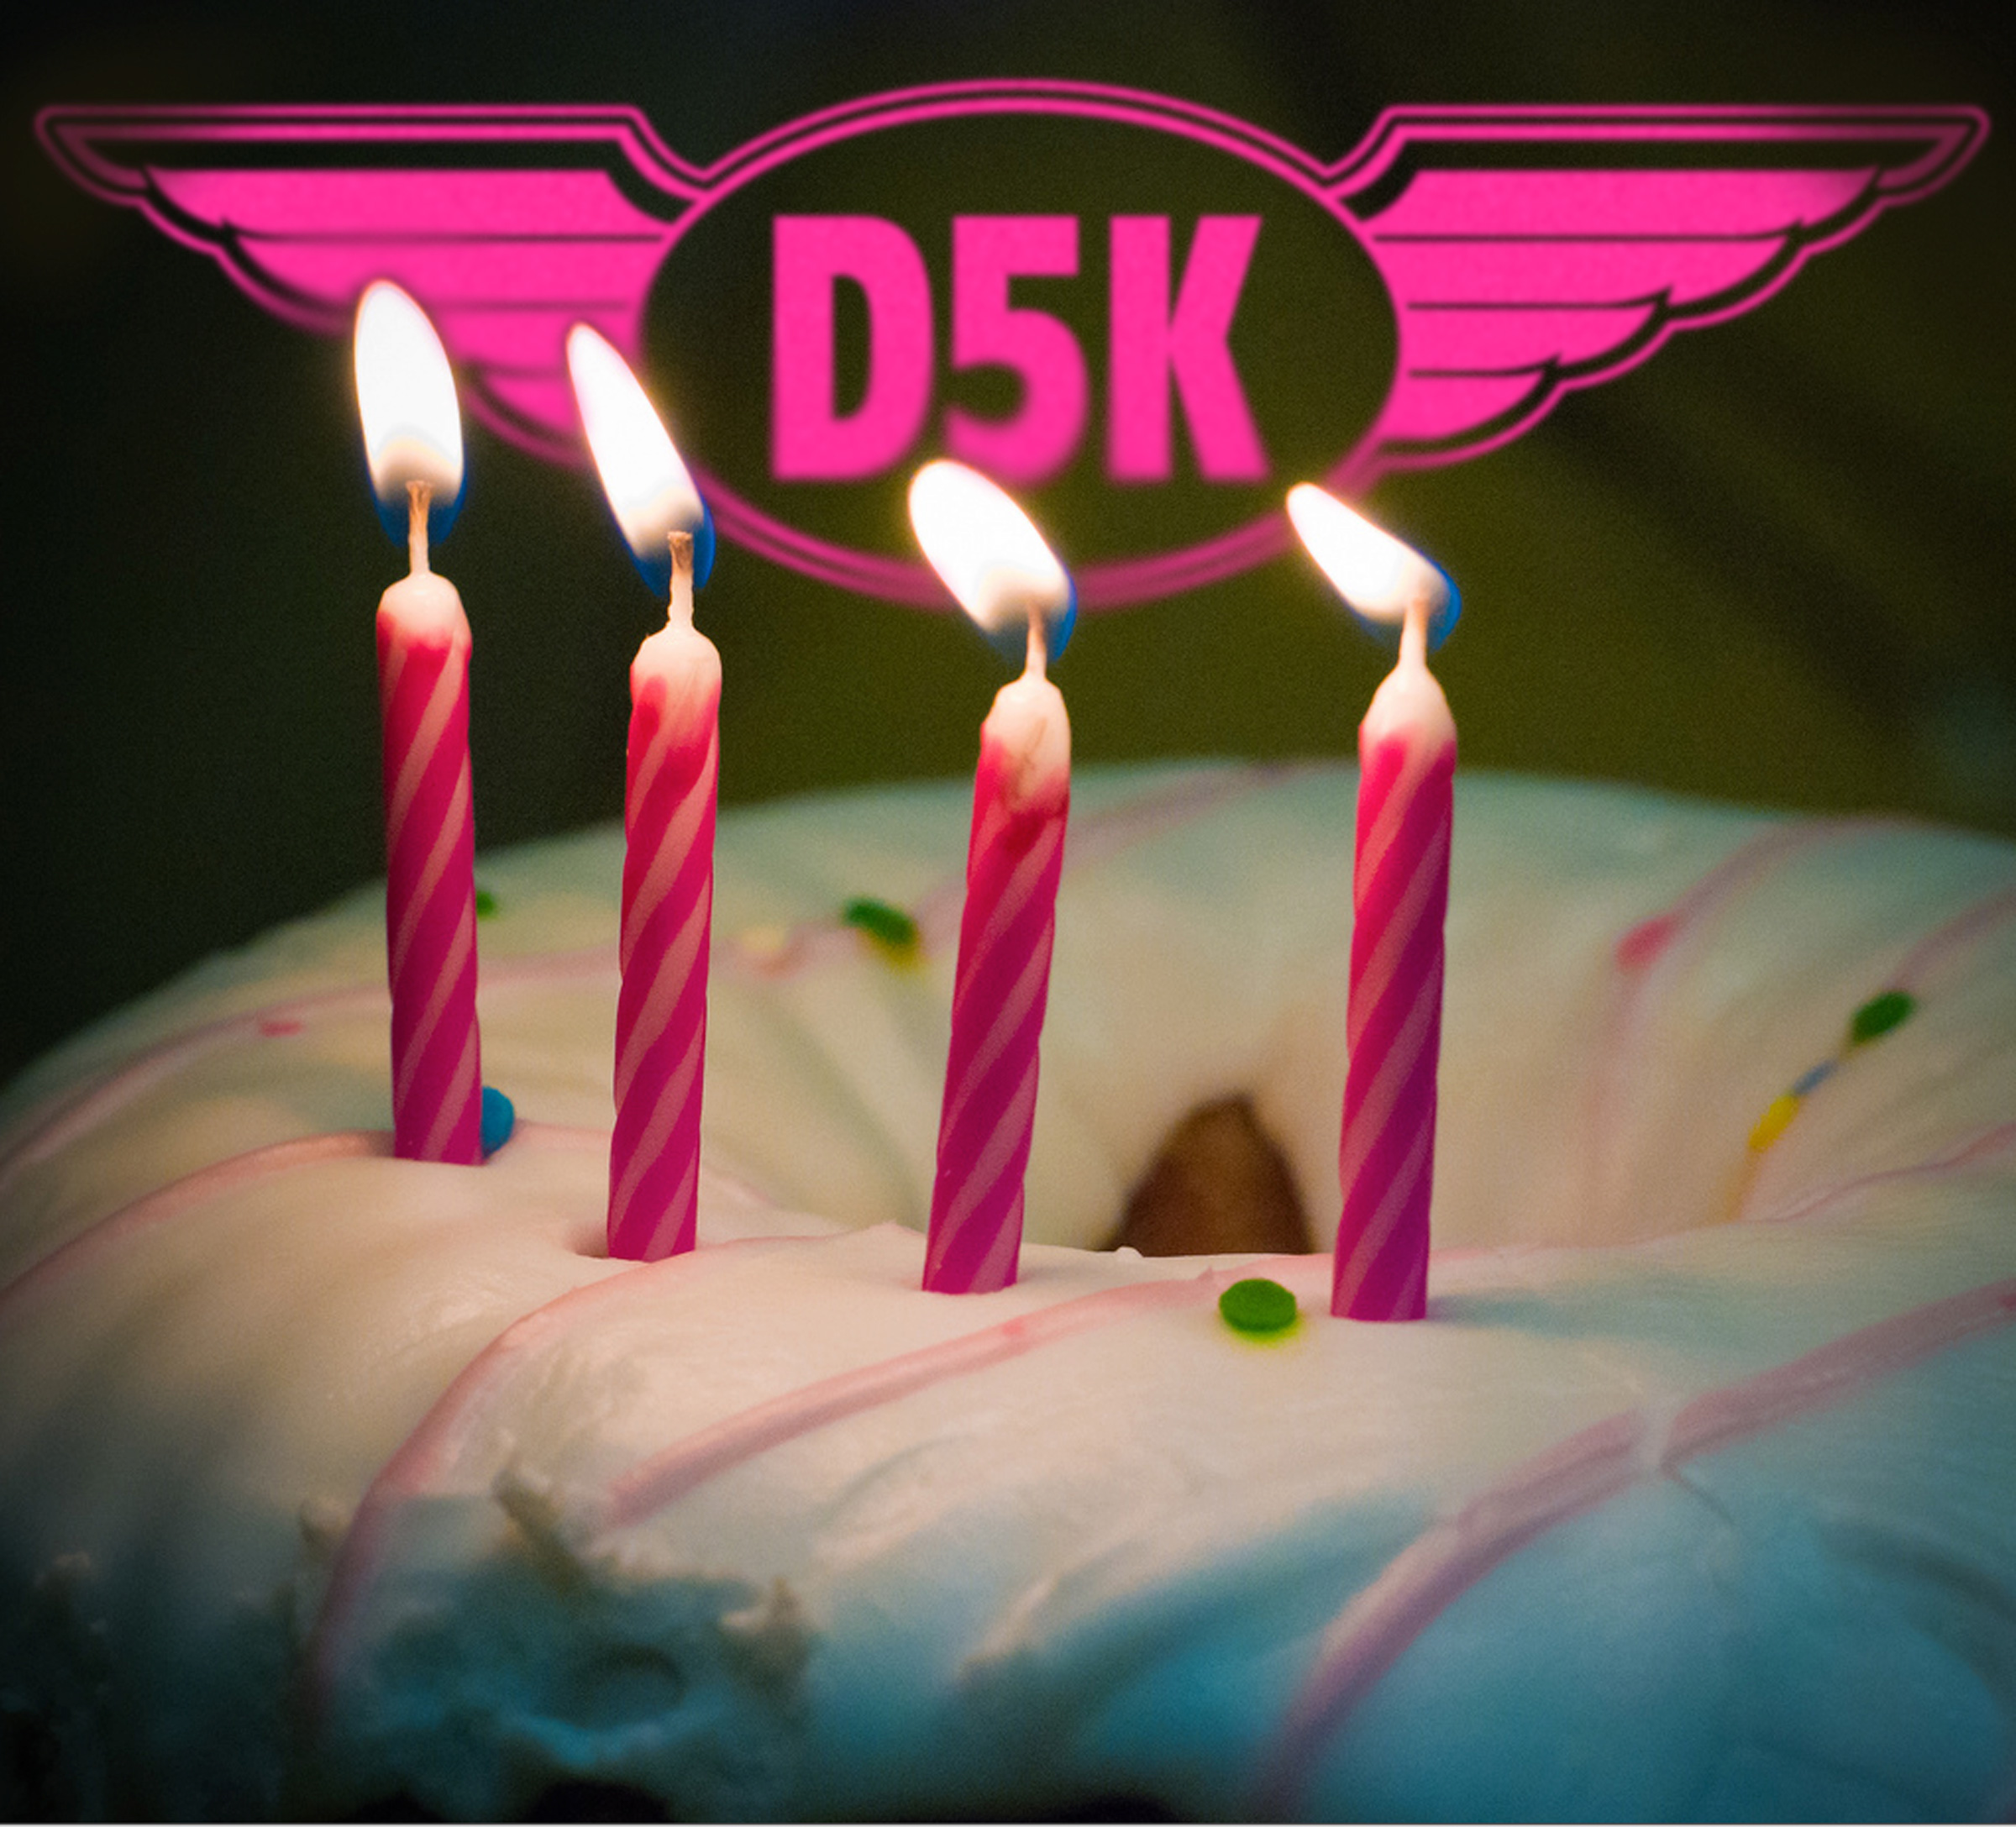 “The D5K Four Year Annivesary Spectacular”